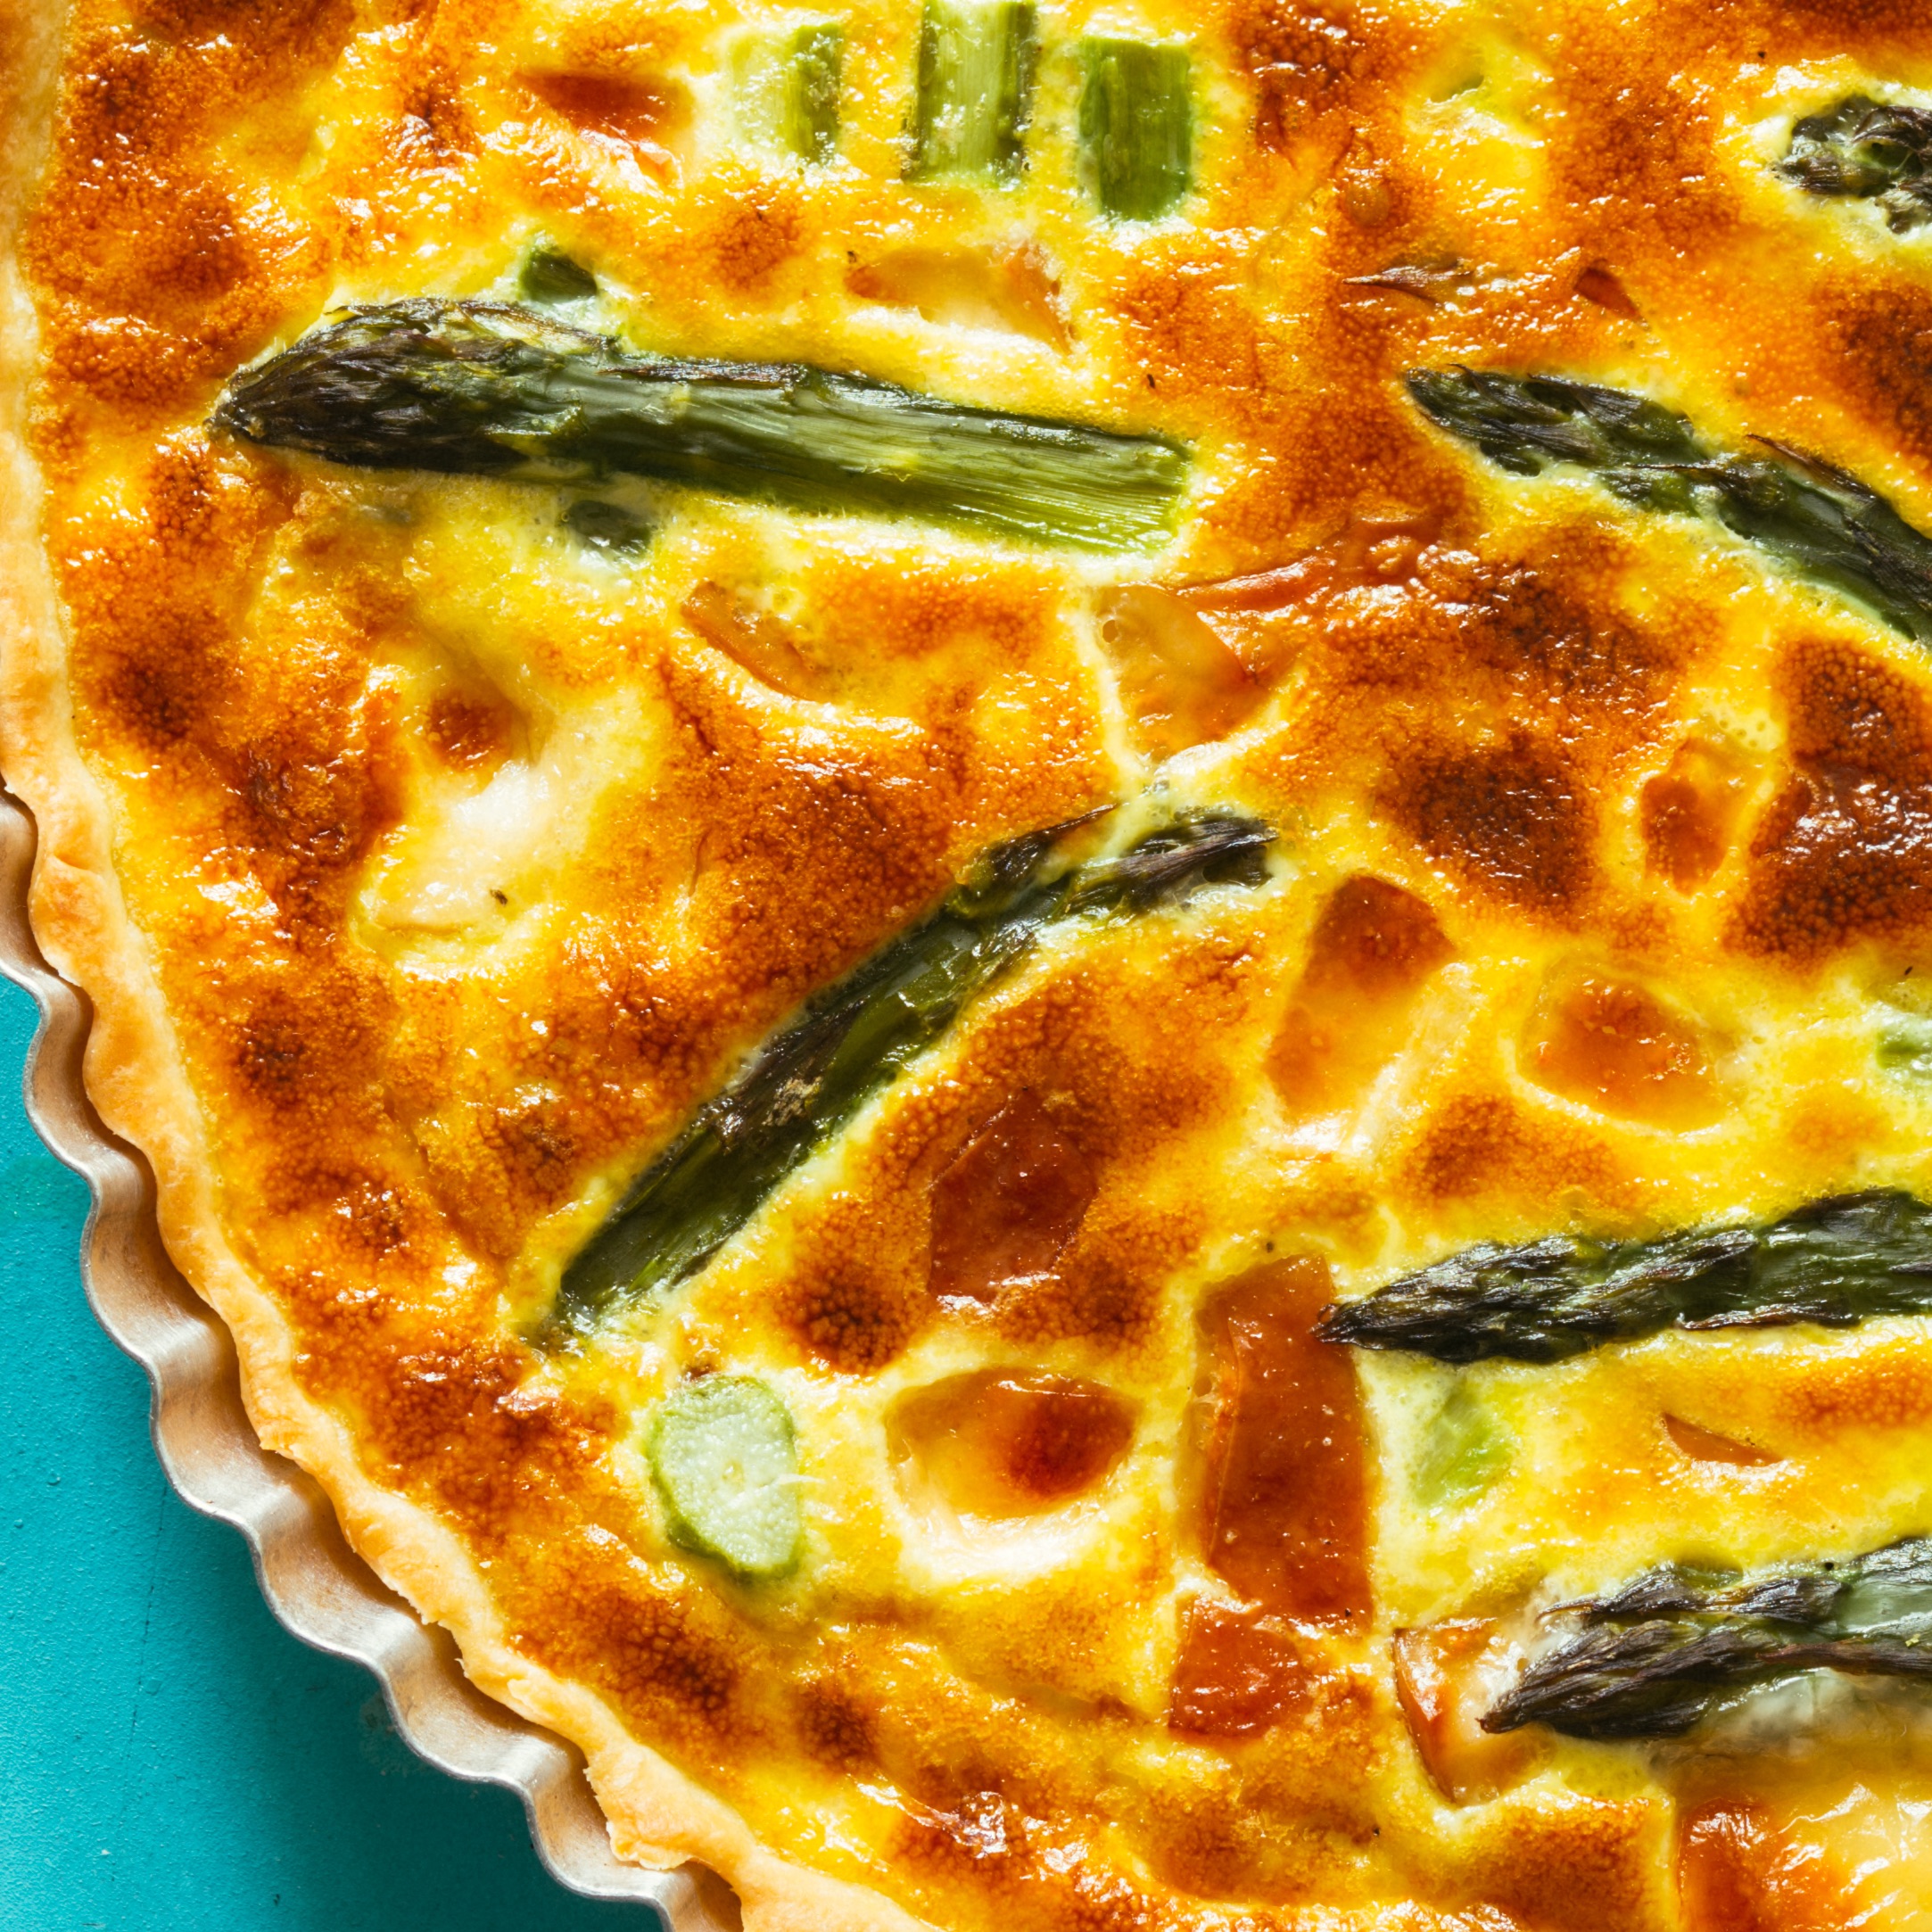 Asparagus and shallot quiche | New potatoes with garlic and herb butter ...